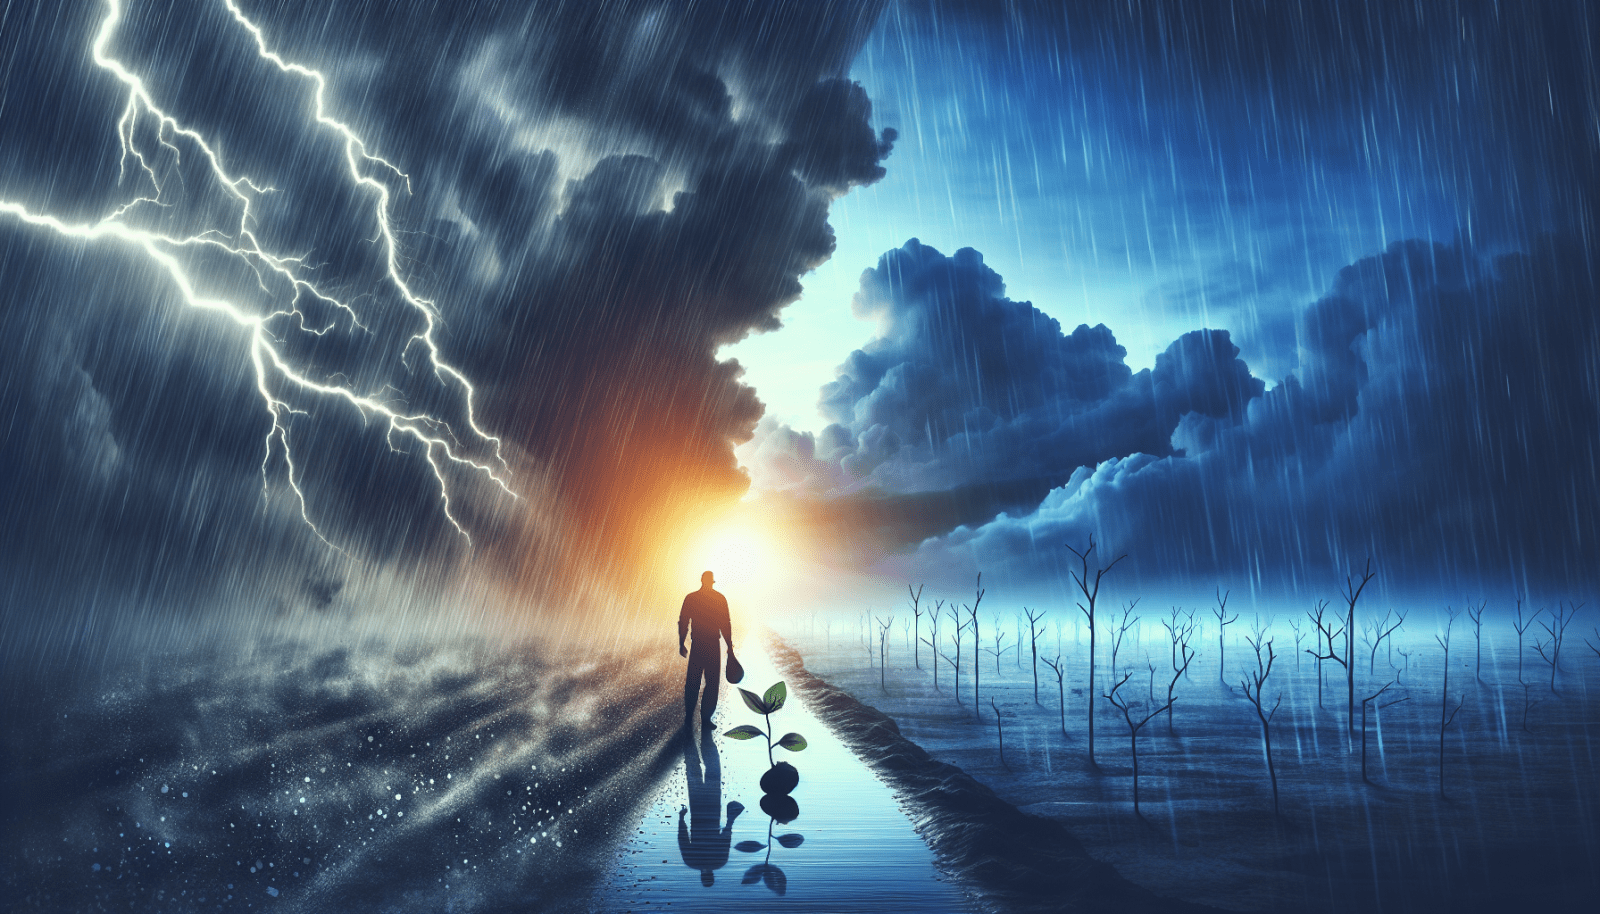 A digital artwork depicting a stark contrast between a stormy environment with lightning and rain on the left, and a tranquil sunset scene with a growing plant on the right, with a silhouette of a person walking along the dividing line.